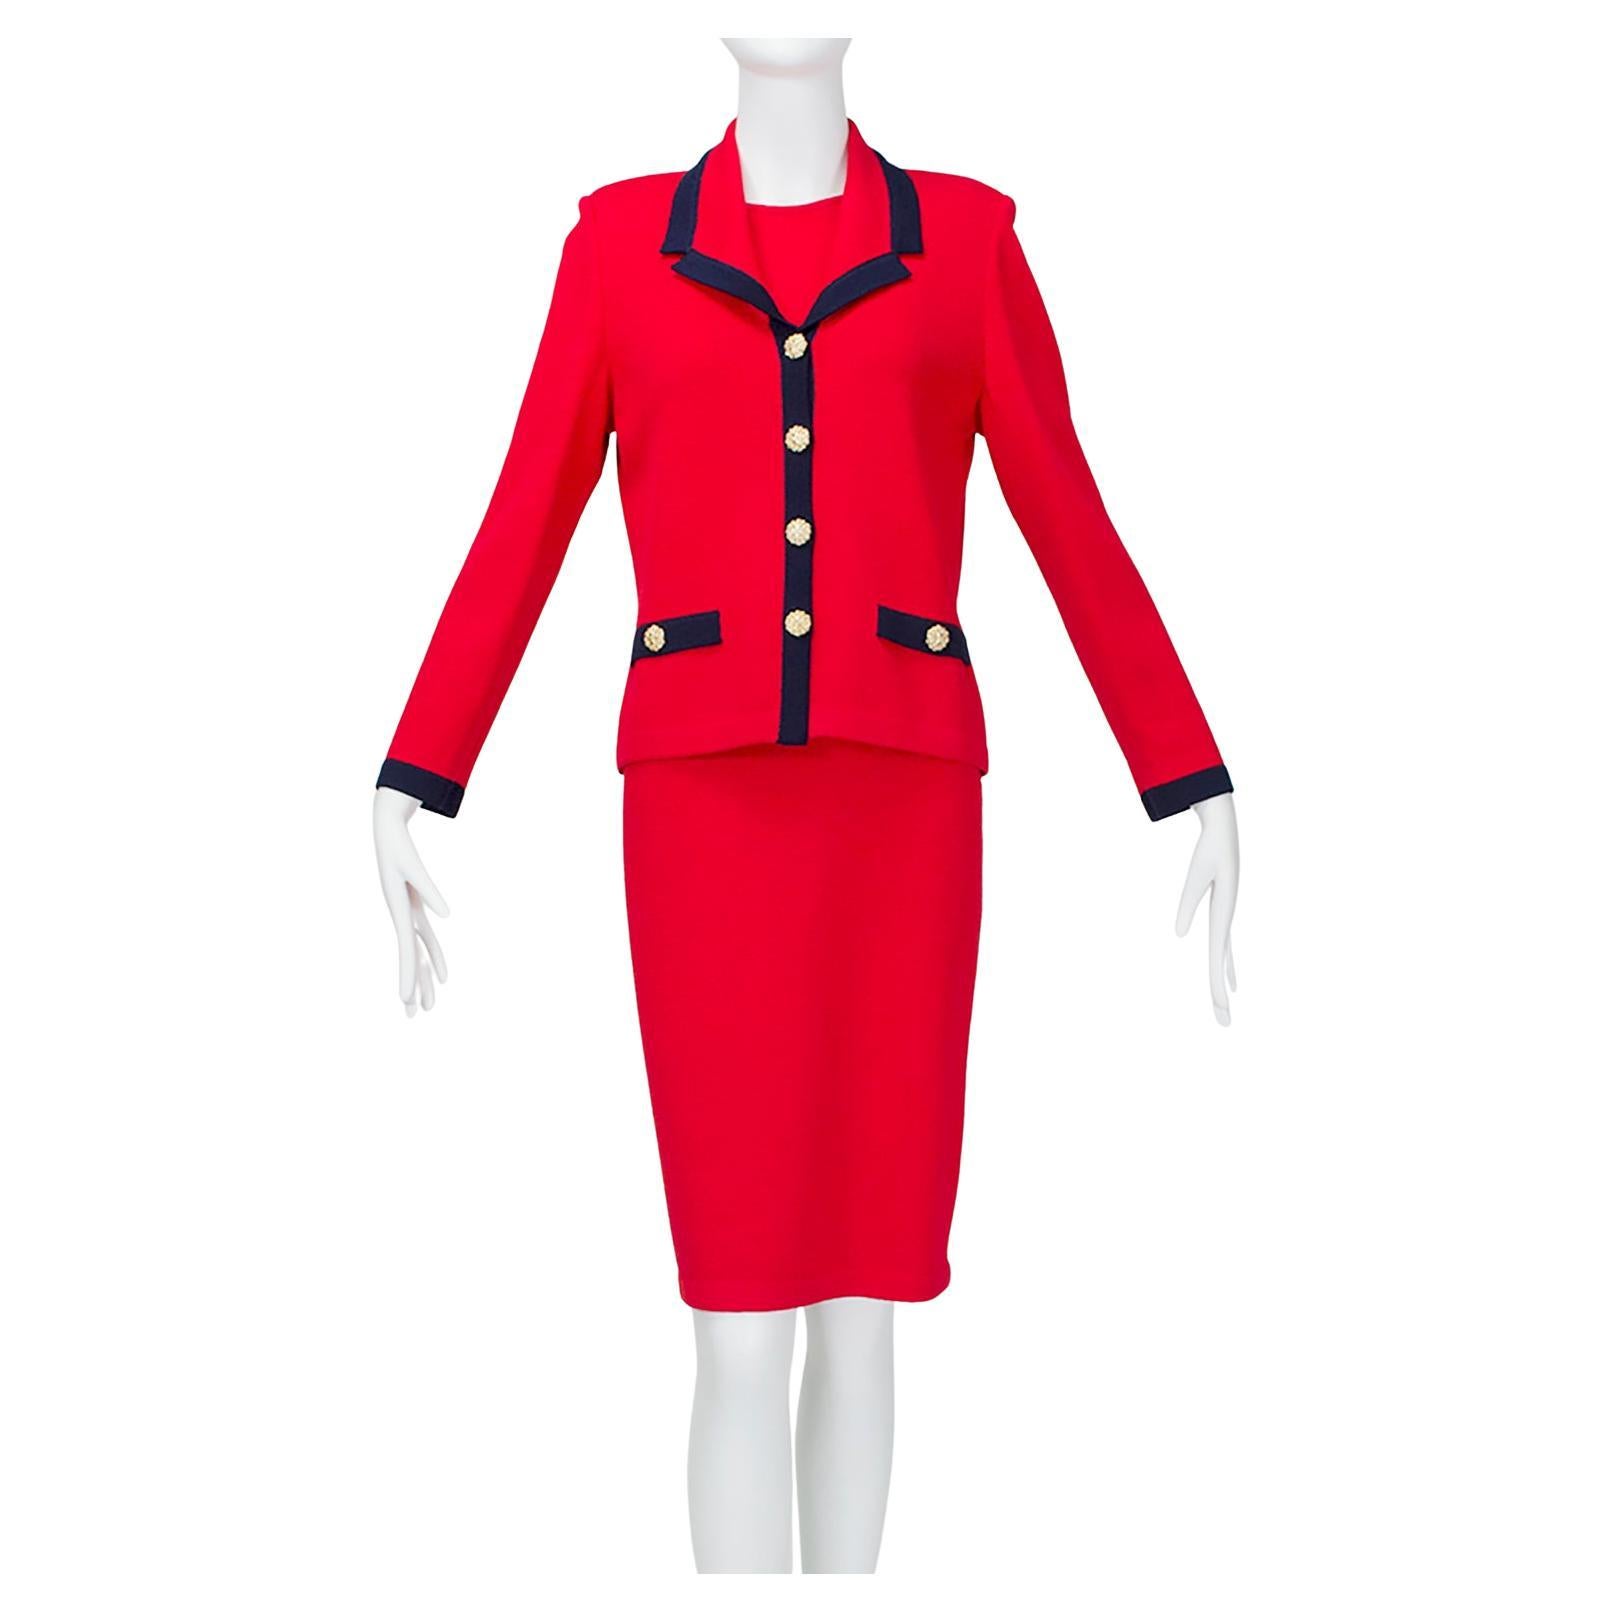 St John Collection Nautical Red Cardigan Dress Suit with Gold Accents – M, 1990s